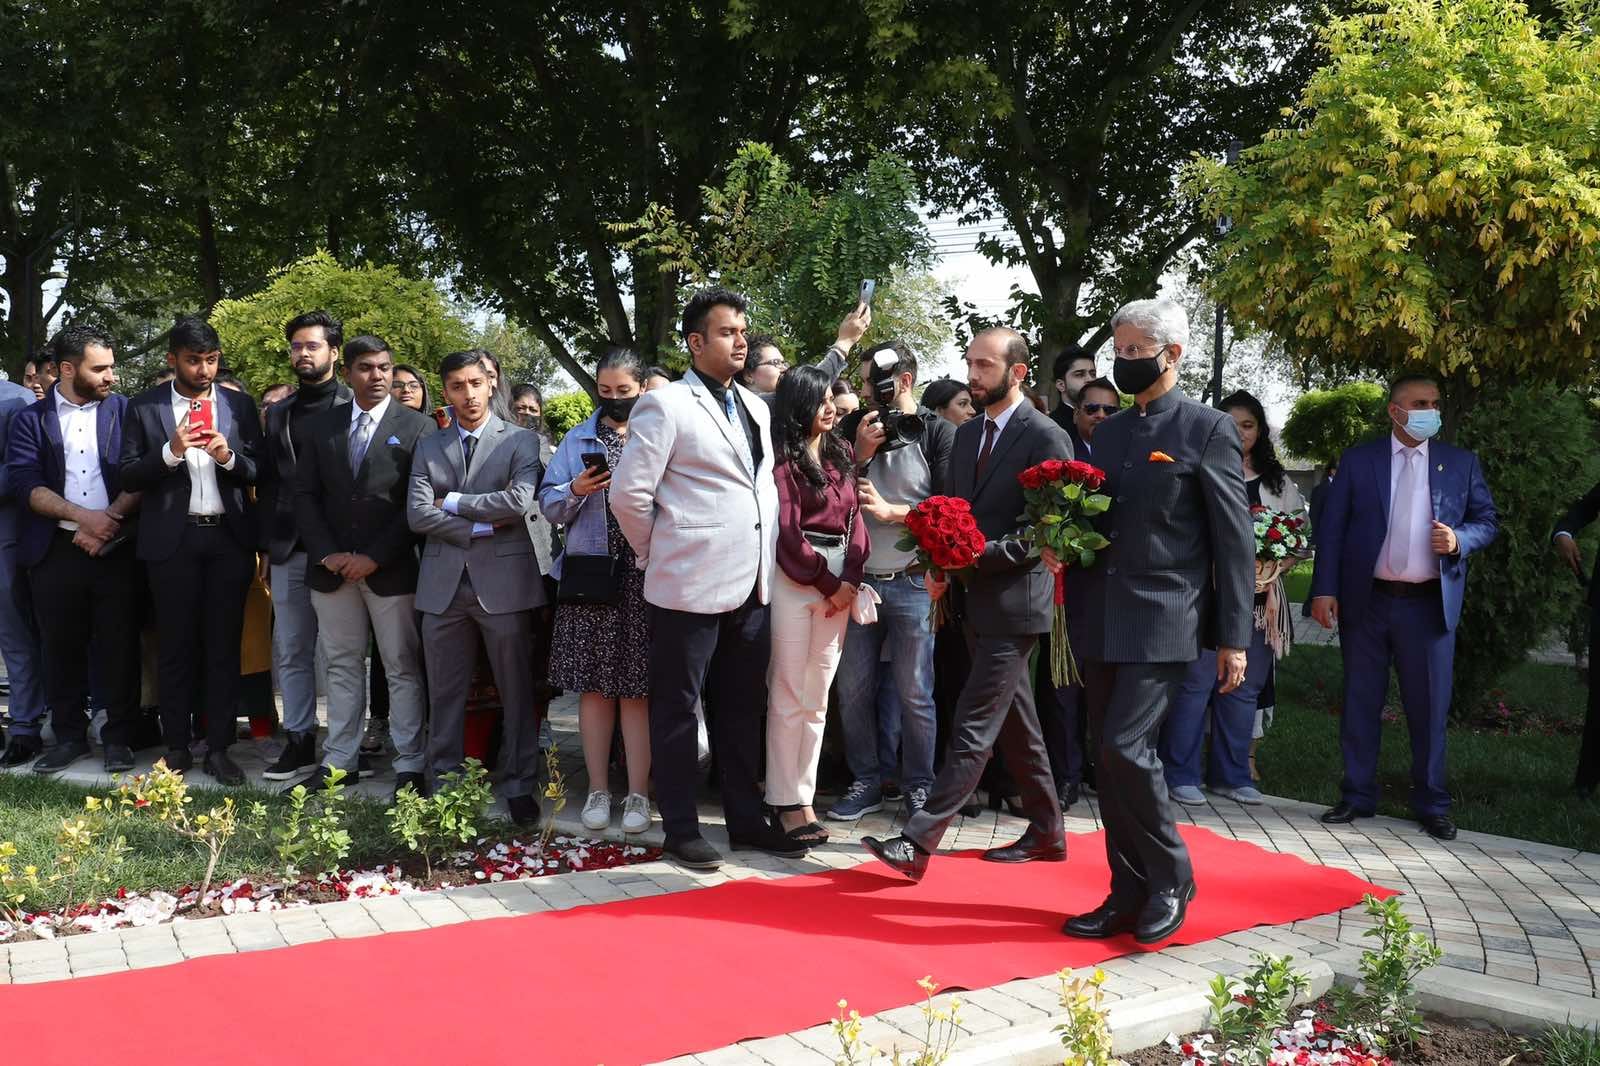 Foreign ministers of Armenia and India visited monument to Mahatma Gandhi